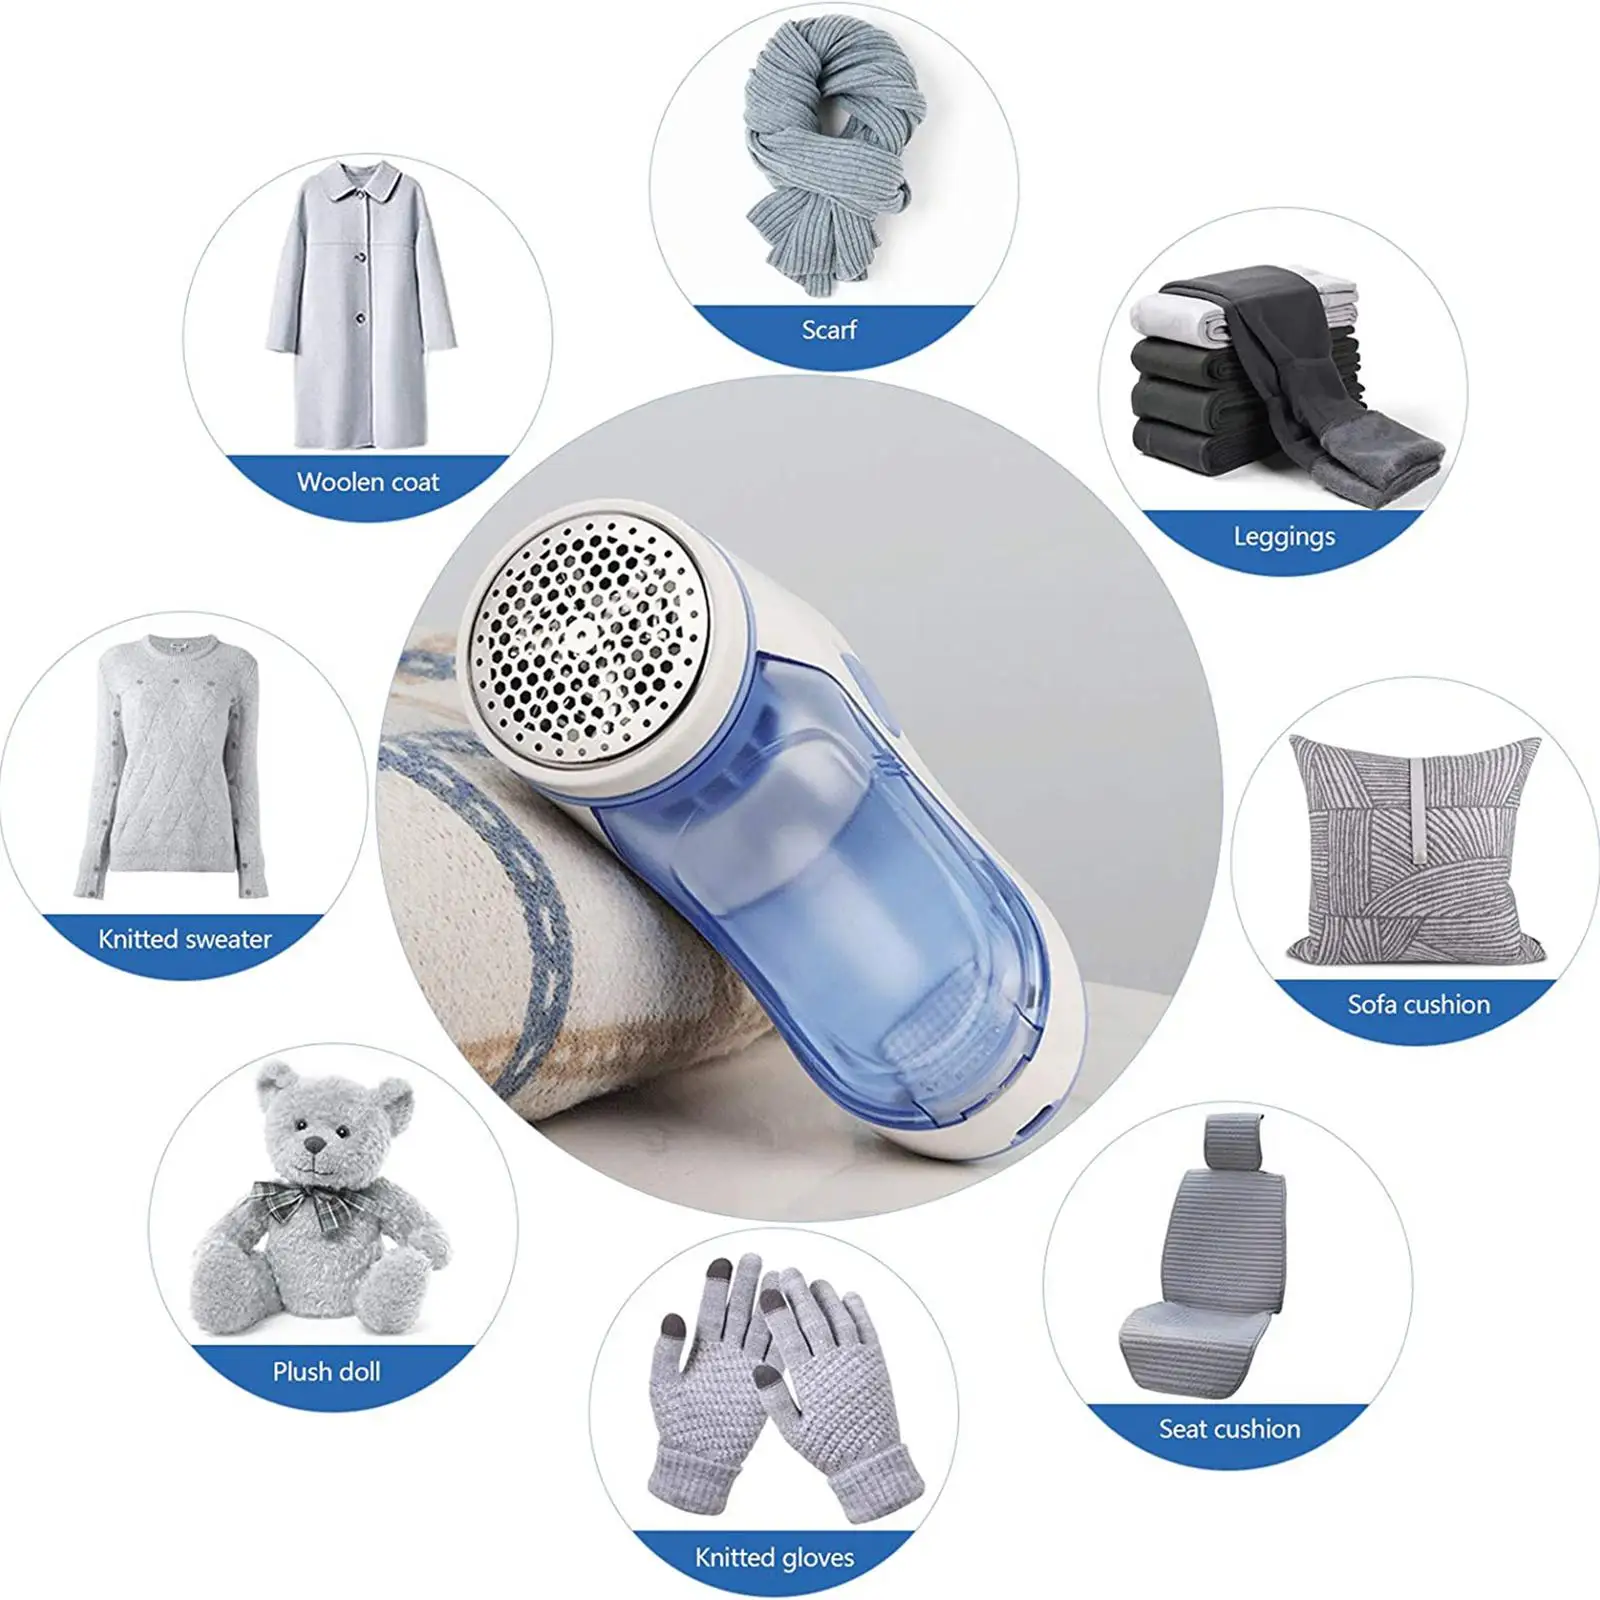 Portable Lint Remover Fabric Shaver Remover USB Honeycomb Knives Net Defuzzer for Synthetic Fibers Cotton Clothes Flannel Wool